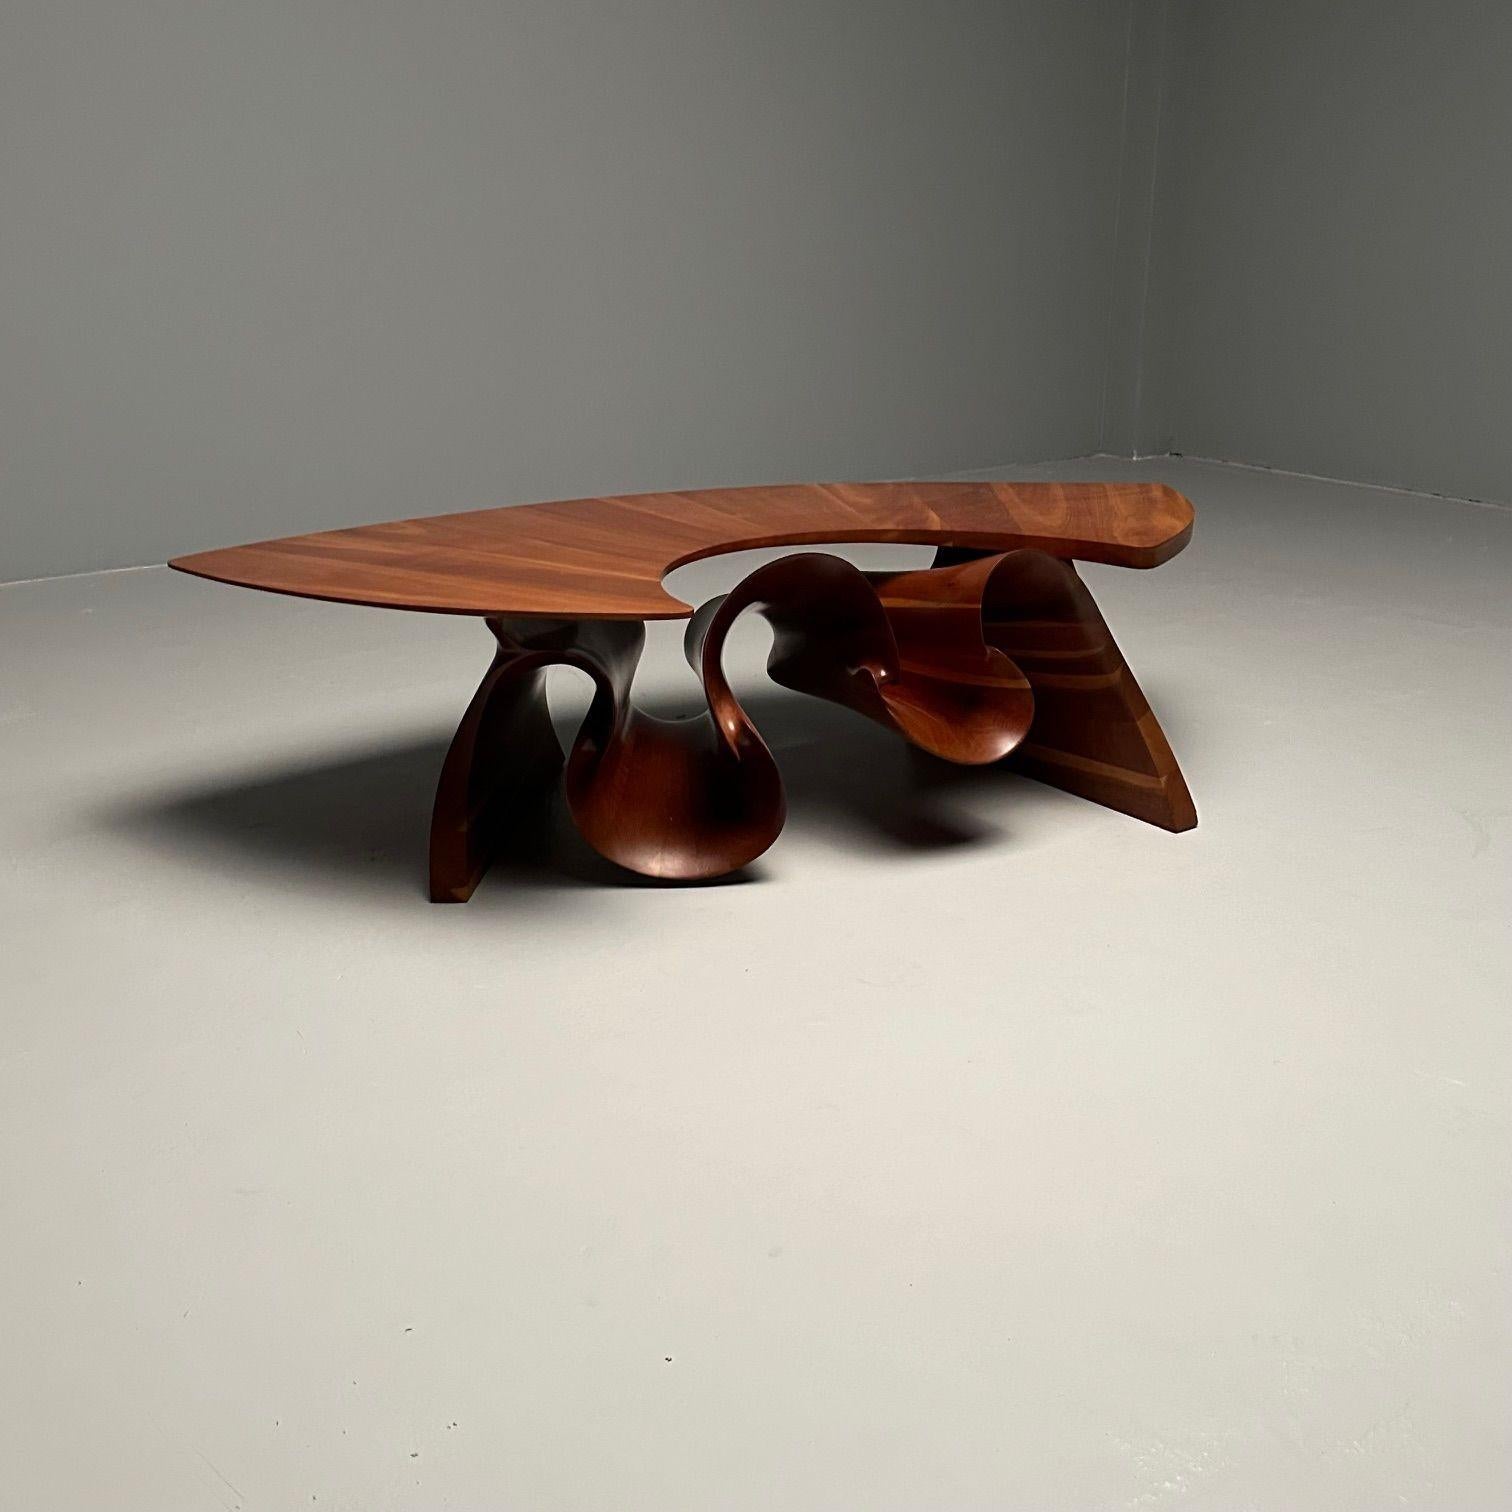 Peter Michael Adams, Mid-Century, Sculptural Coffee Table, Walnut, USA, 1970s

A rare and important coffee / cocktail table branded with the initials PMA. The wildly sculptural base supporting a pegged removable table top in a boomerang form. This